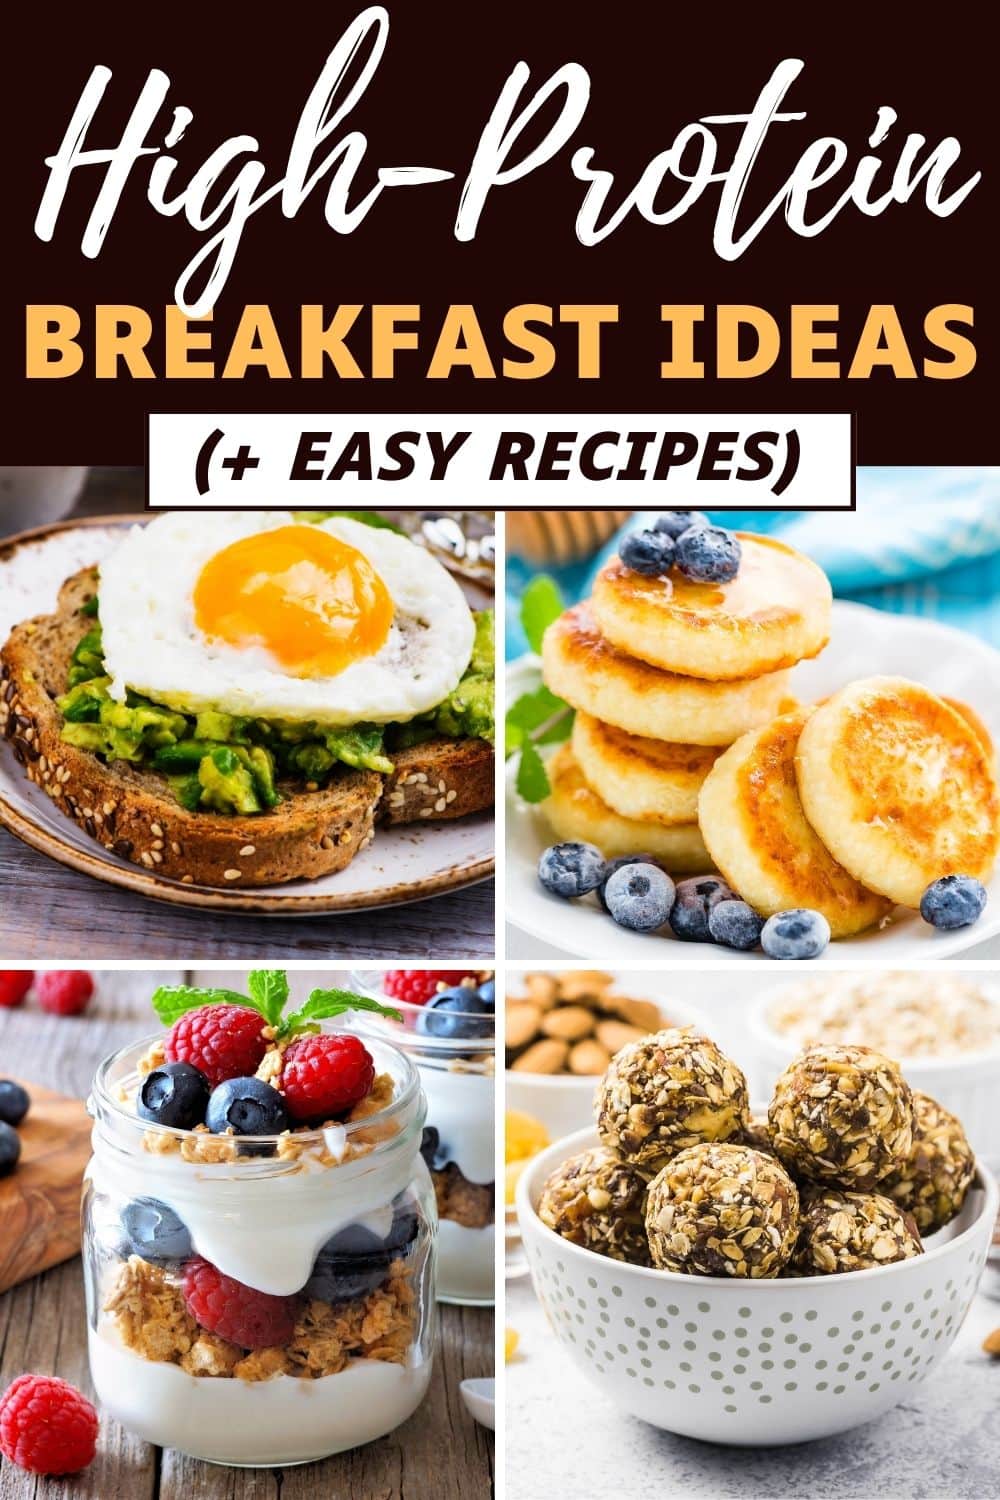 30 High-Protein Breakfasts to Fuel Your Day - Insanely Good